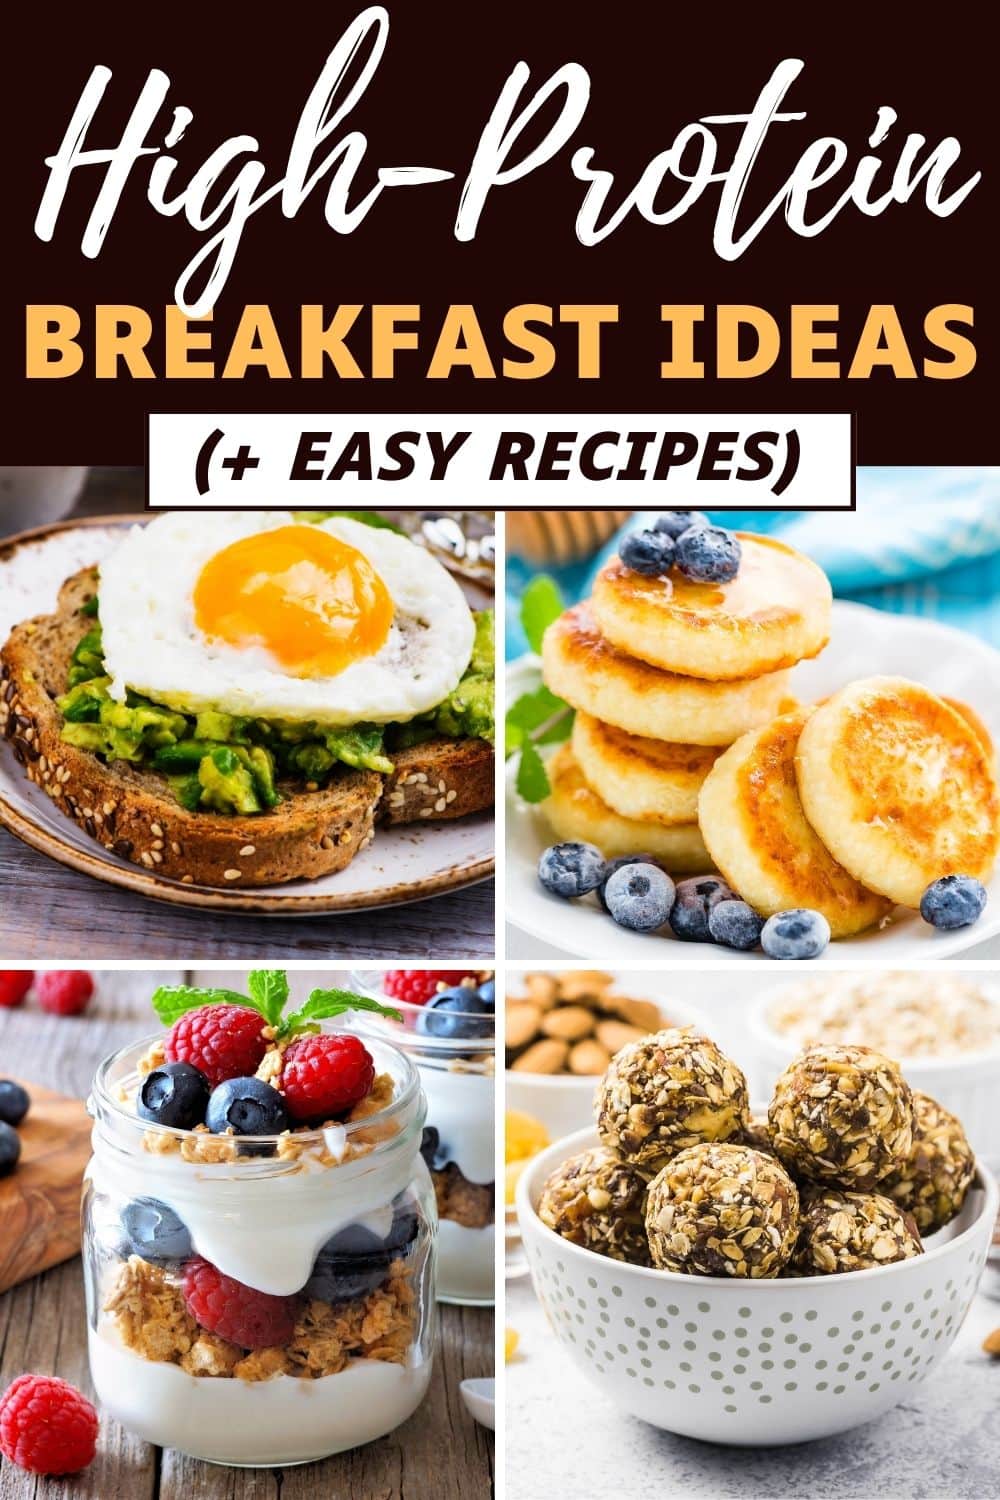 30 High-Protein Breakfasts to Fuel Your Day - Insanely Good